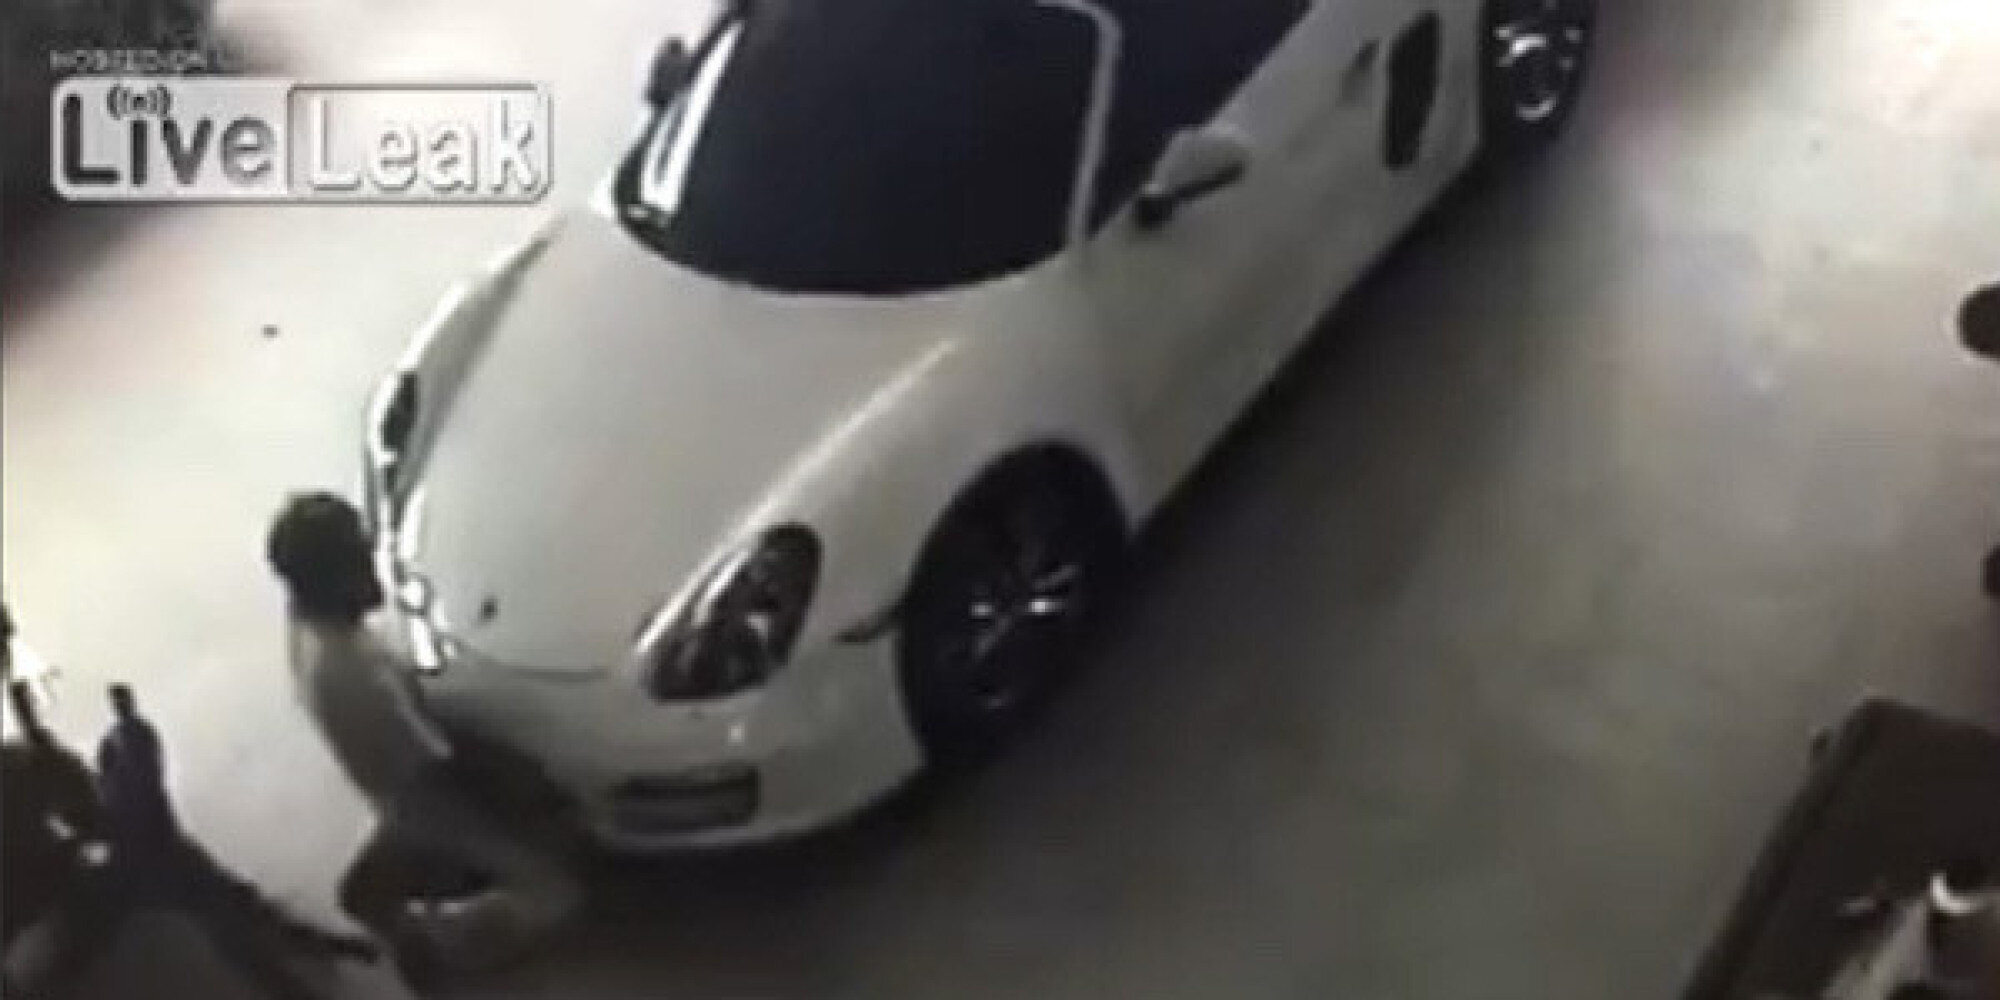 Man Has Sex With Porsche In Thailand, Gets Caught On CCTV Video HuffPost UK News